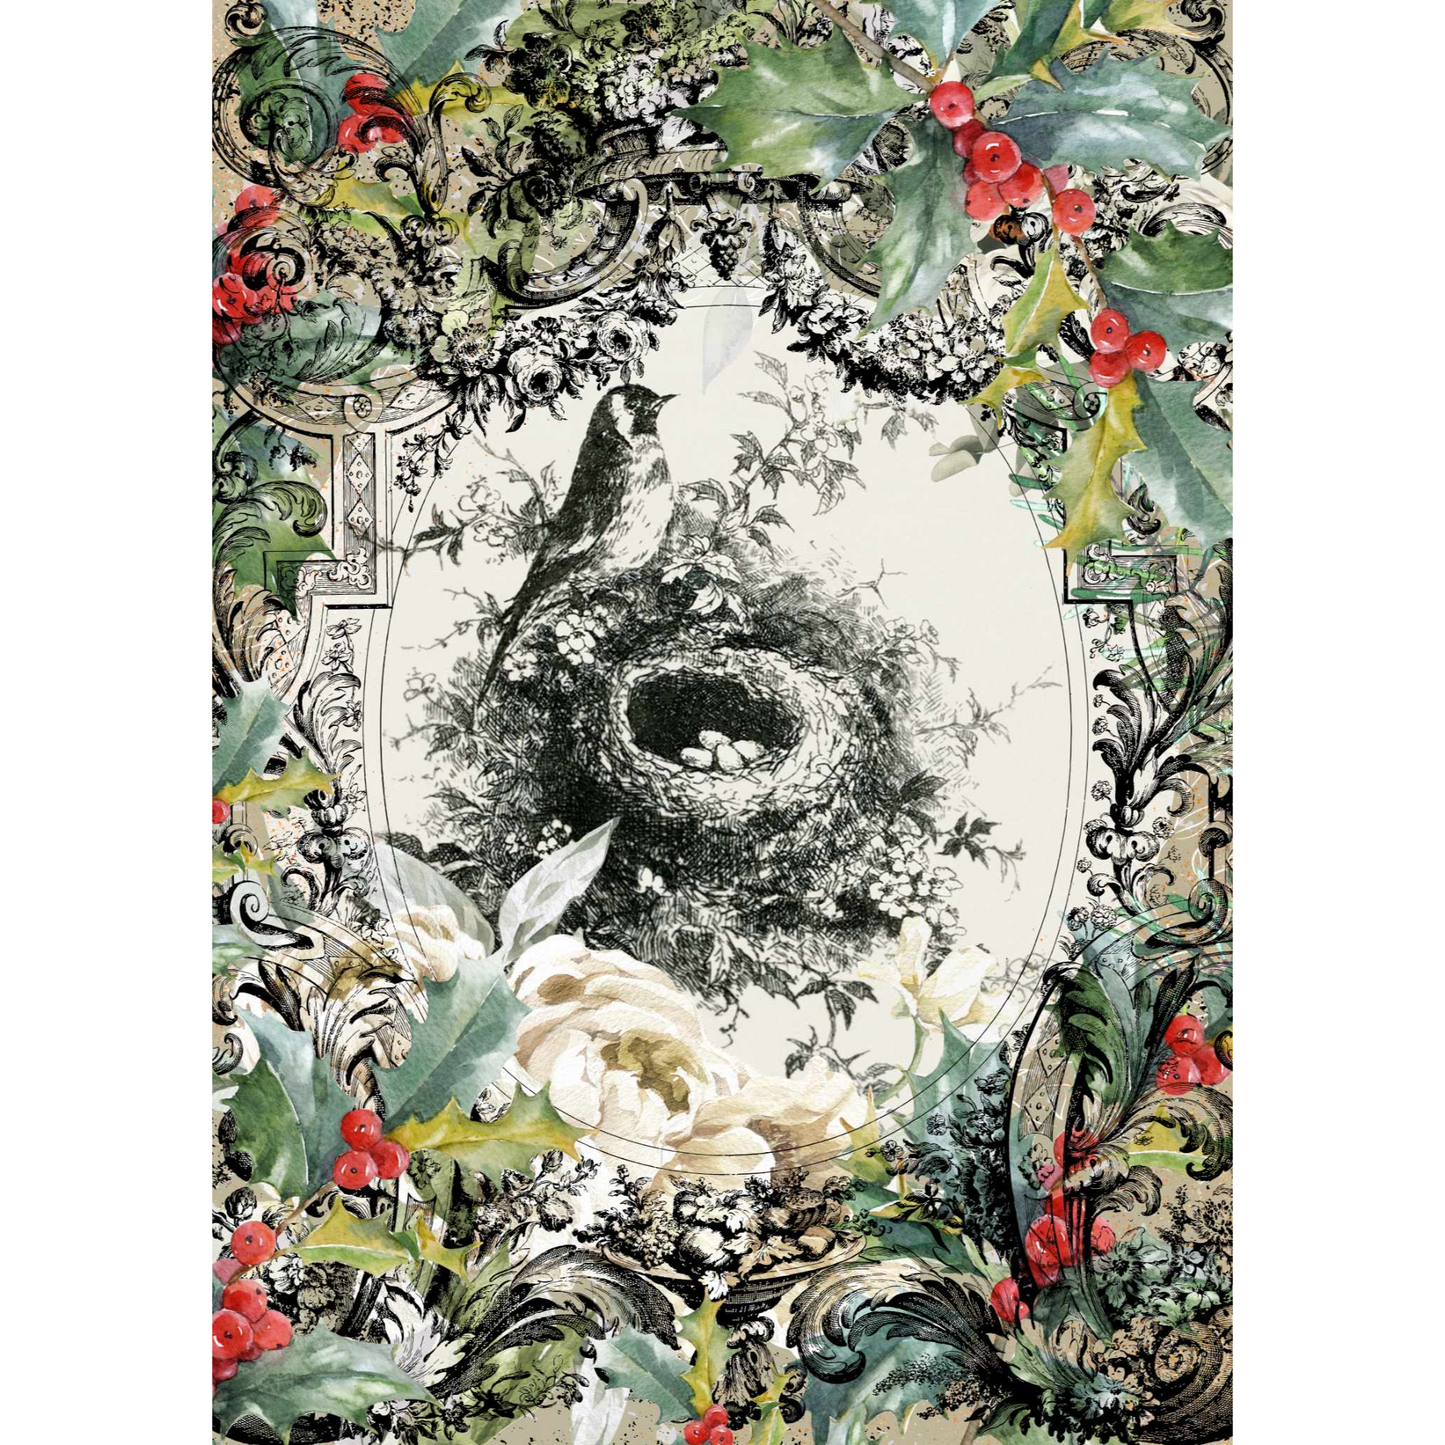 "Old Time Christmas" 3 sheet decoupage paper set by Made By Marley. Sheet #3 of 3.  Available at Milton's Daughter.